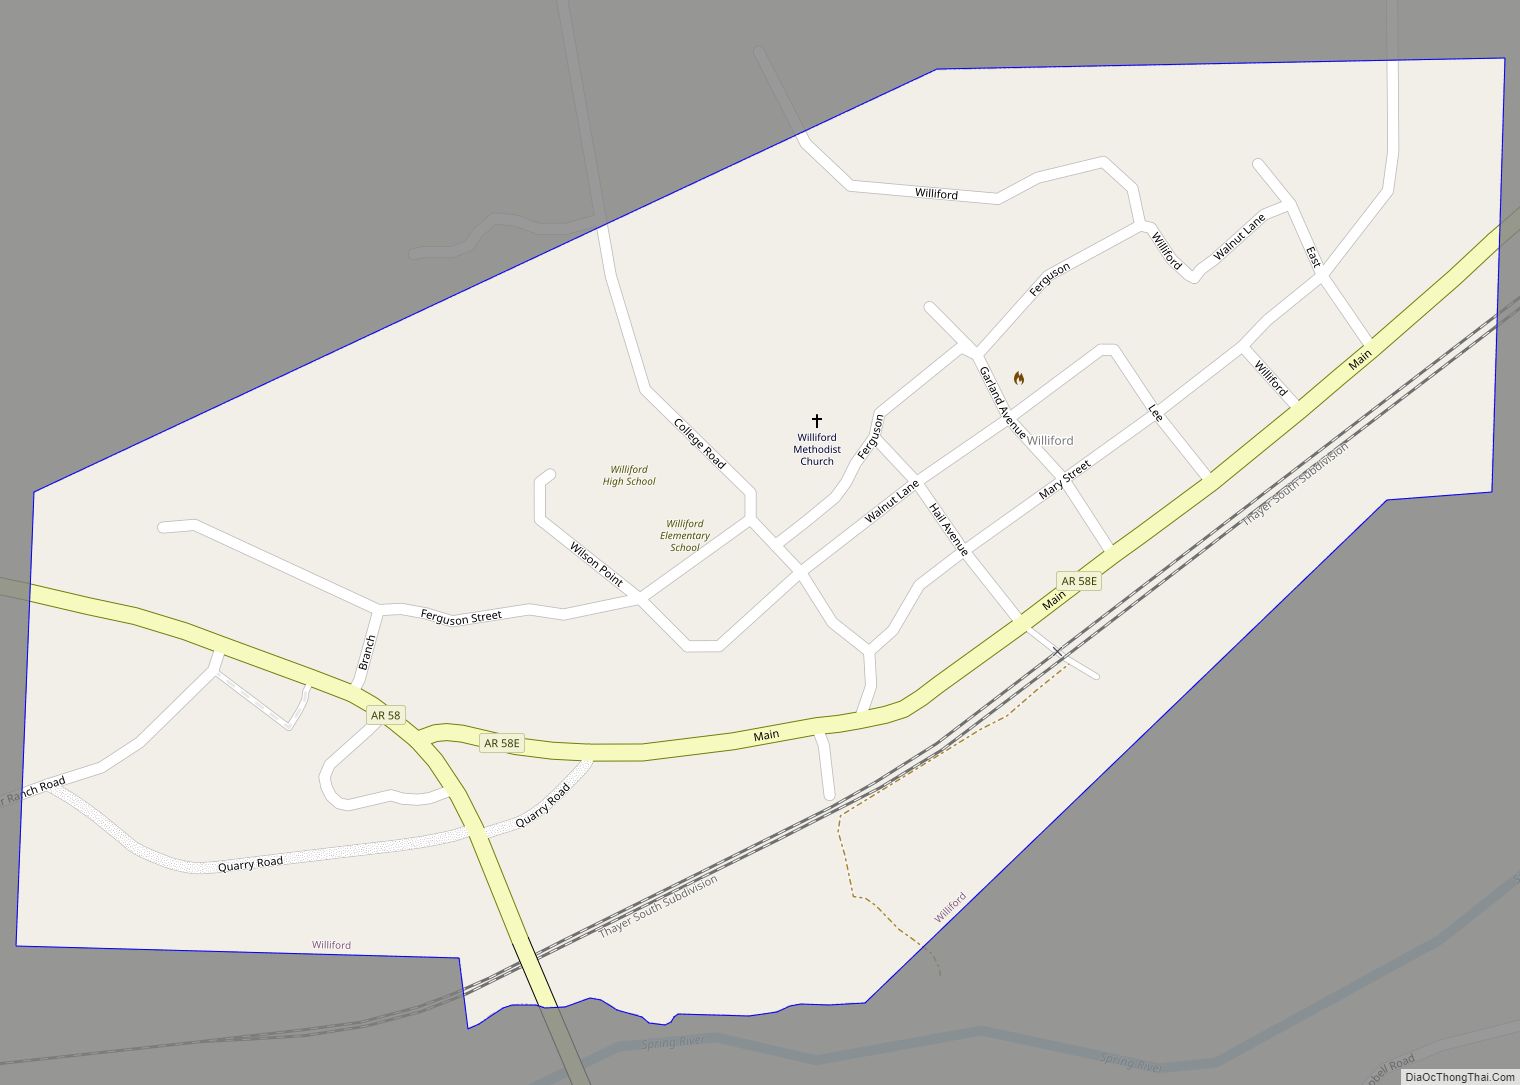 Map of Williford town